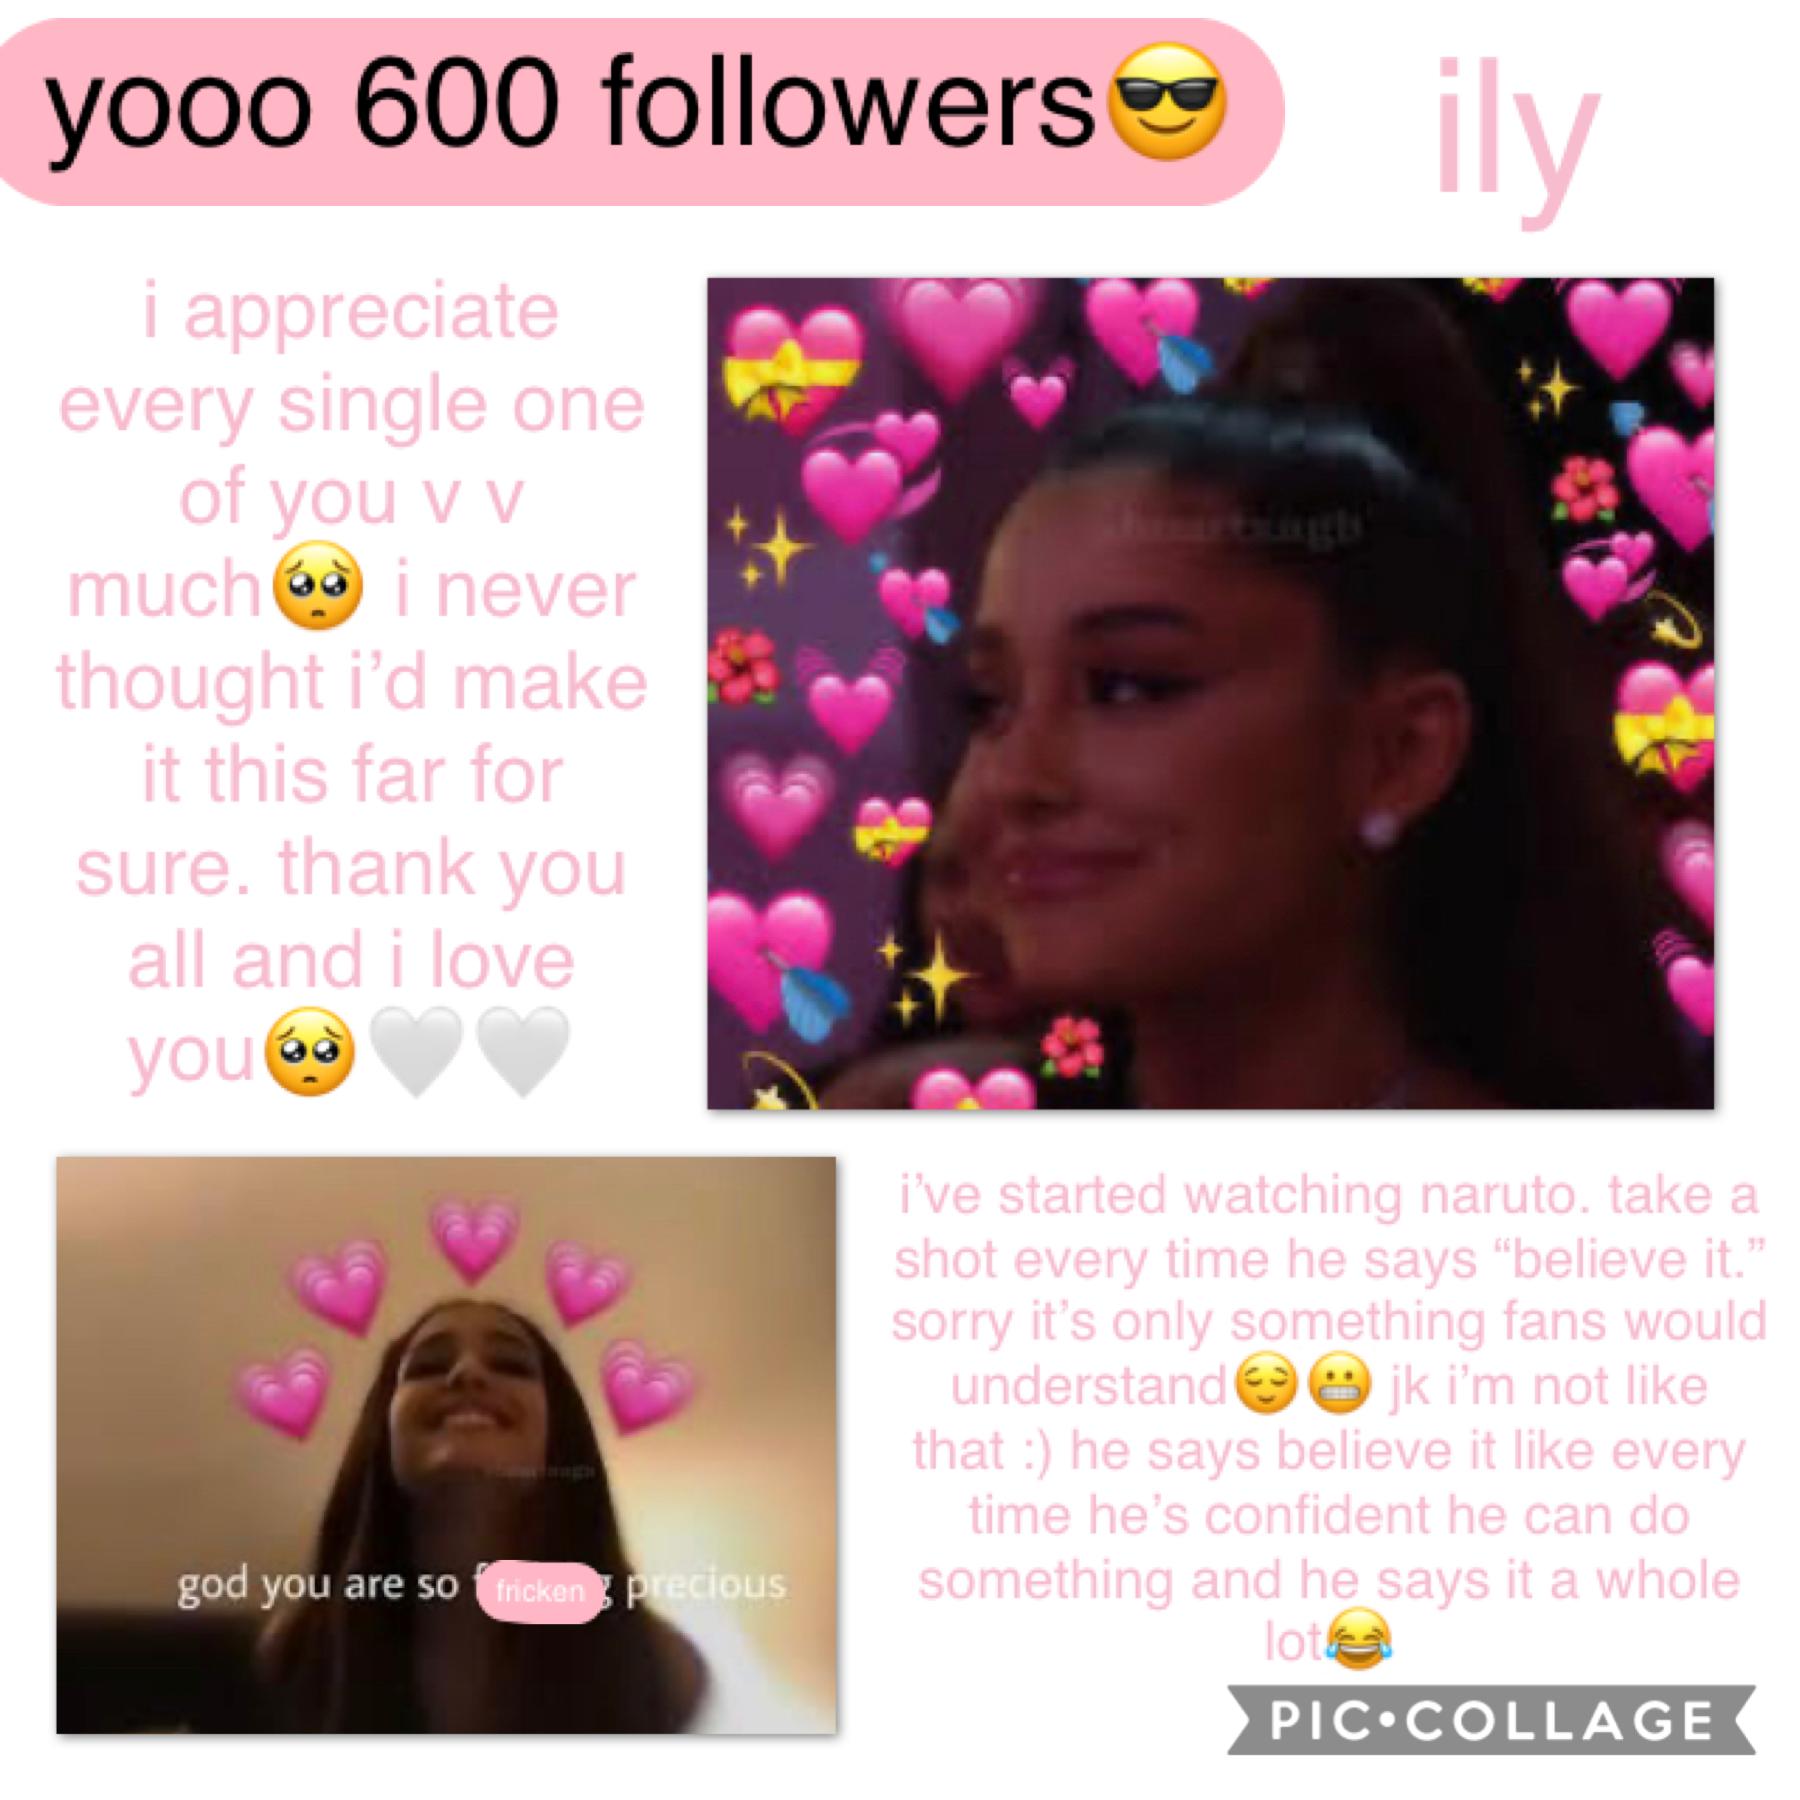 I LOVE YOU ALLLLL (tap)
shoutout to brady, ella, and maddie🤍 
literally the most supportive people on this earth fr
ily guys and thank you for being there for me🥺🤍